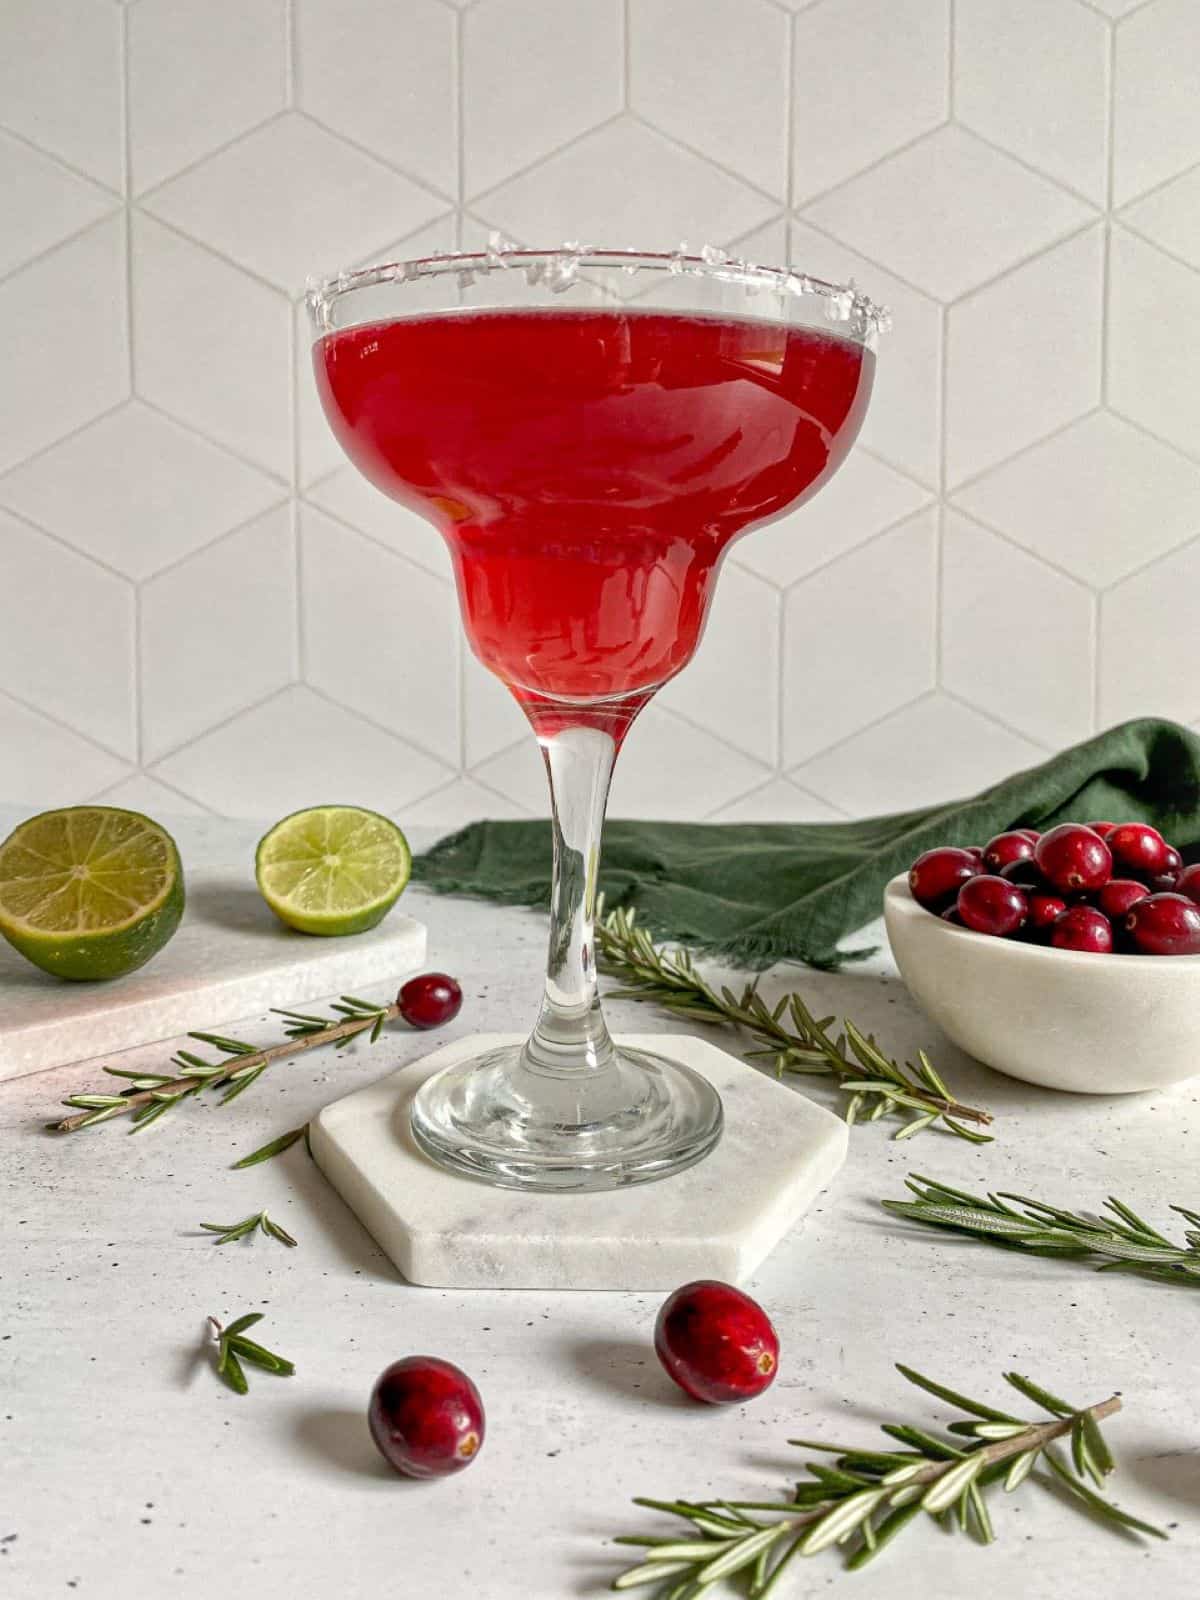 A cranberry margarita in a glass with a salt rim surrounded by fresh cranberries and limes.